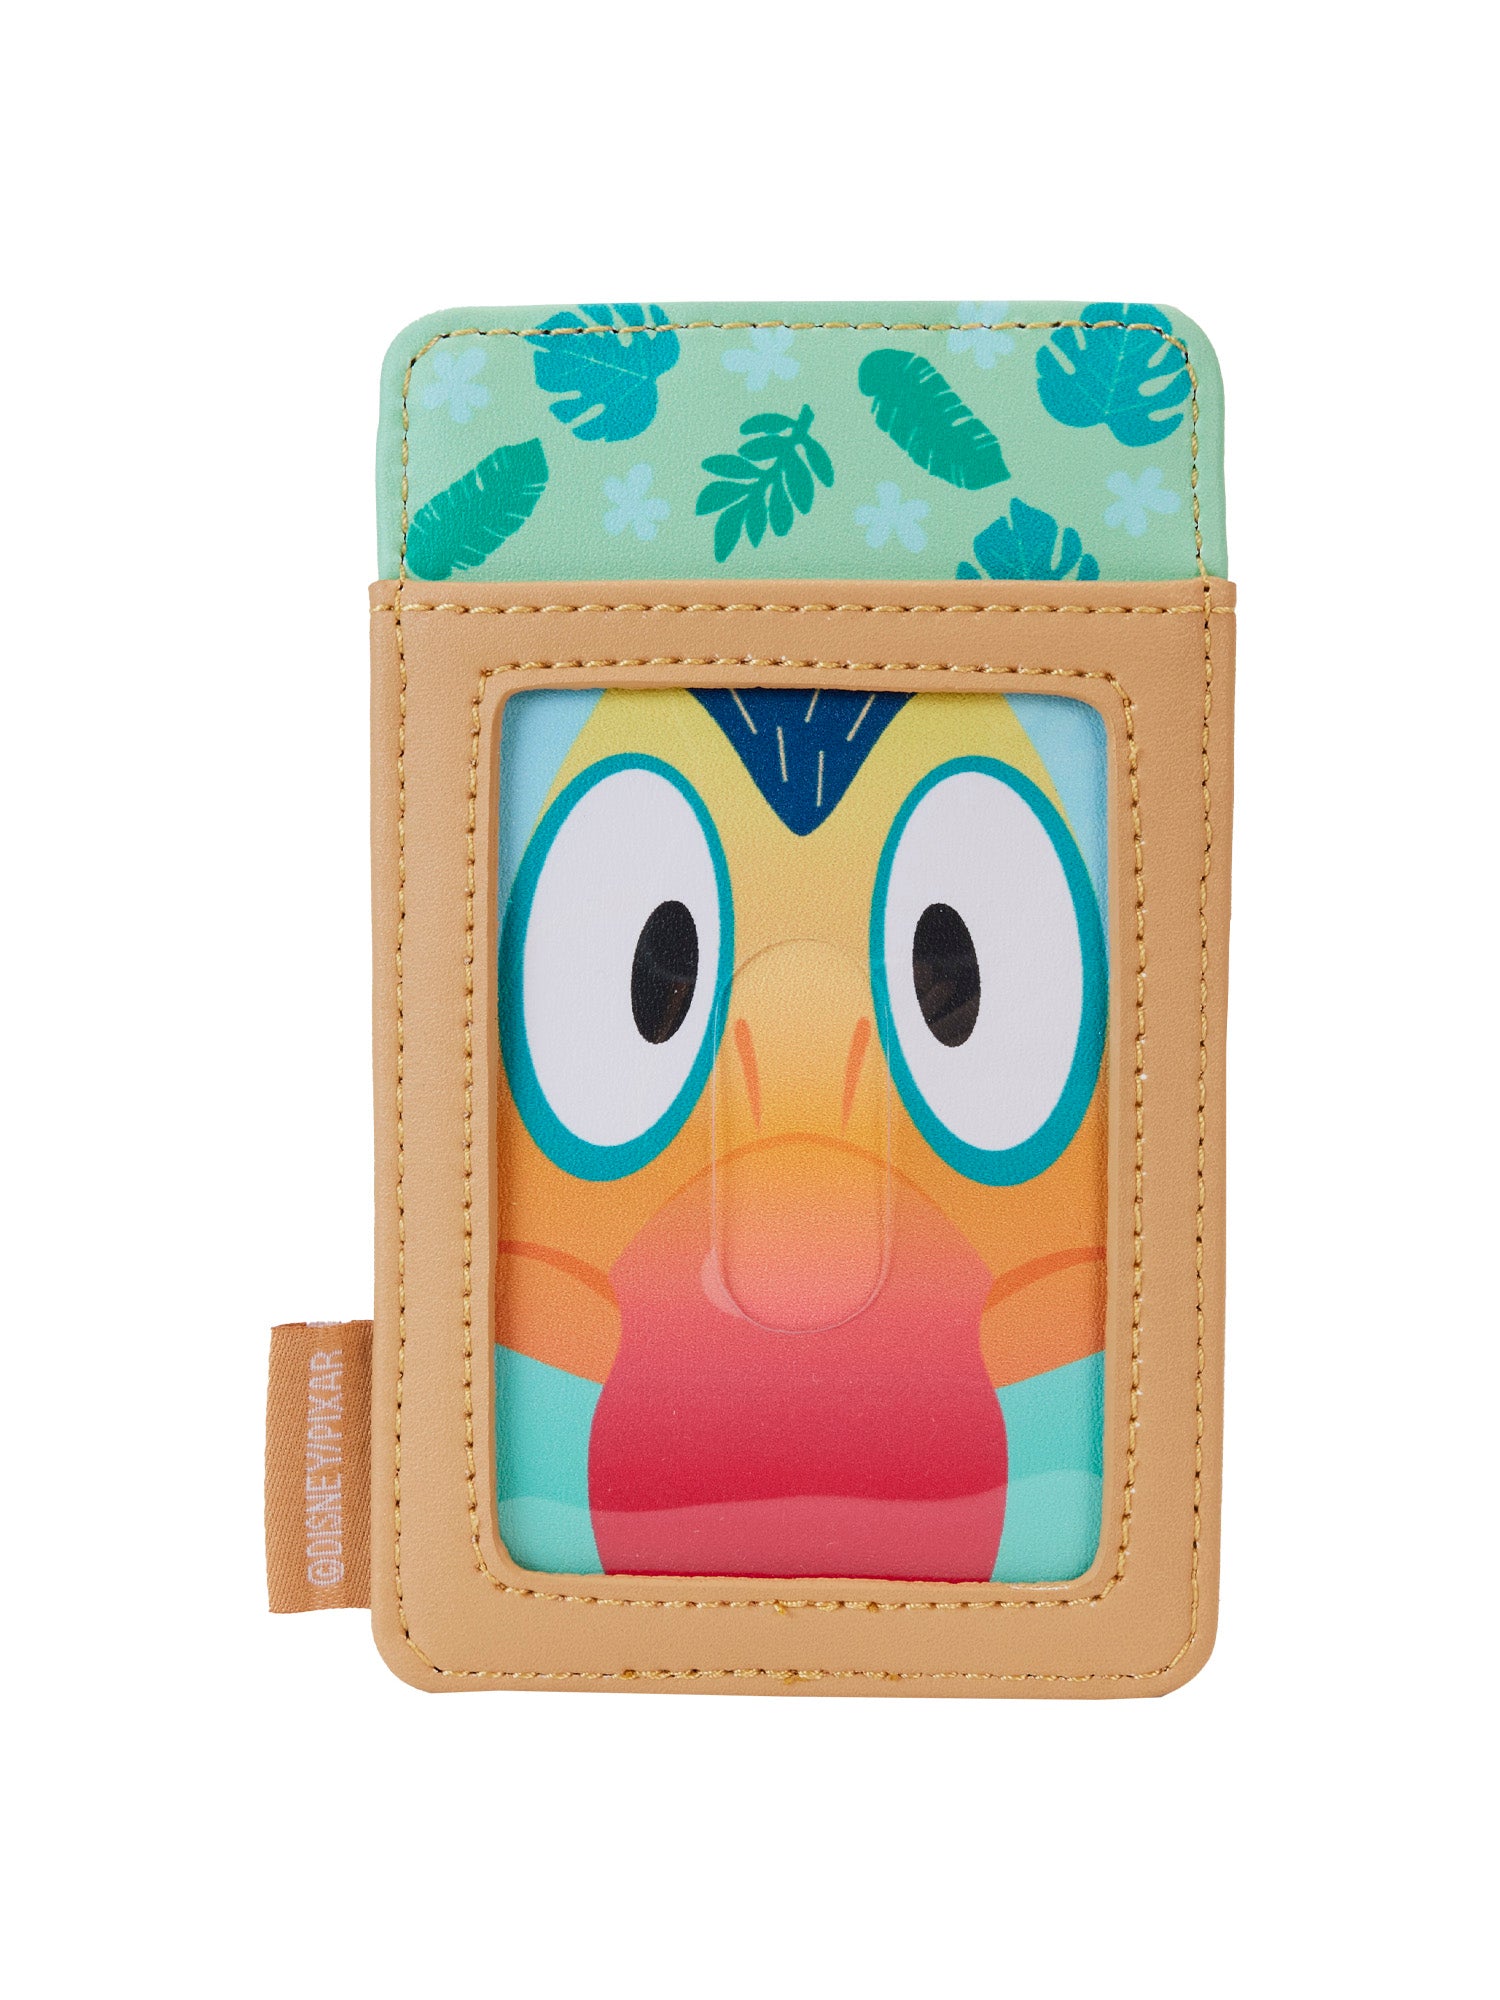 Loungefly x Pixar UP Kevin Card Holder Wallet 15th Anniversary